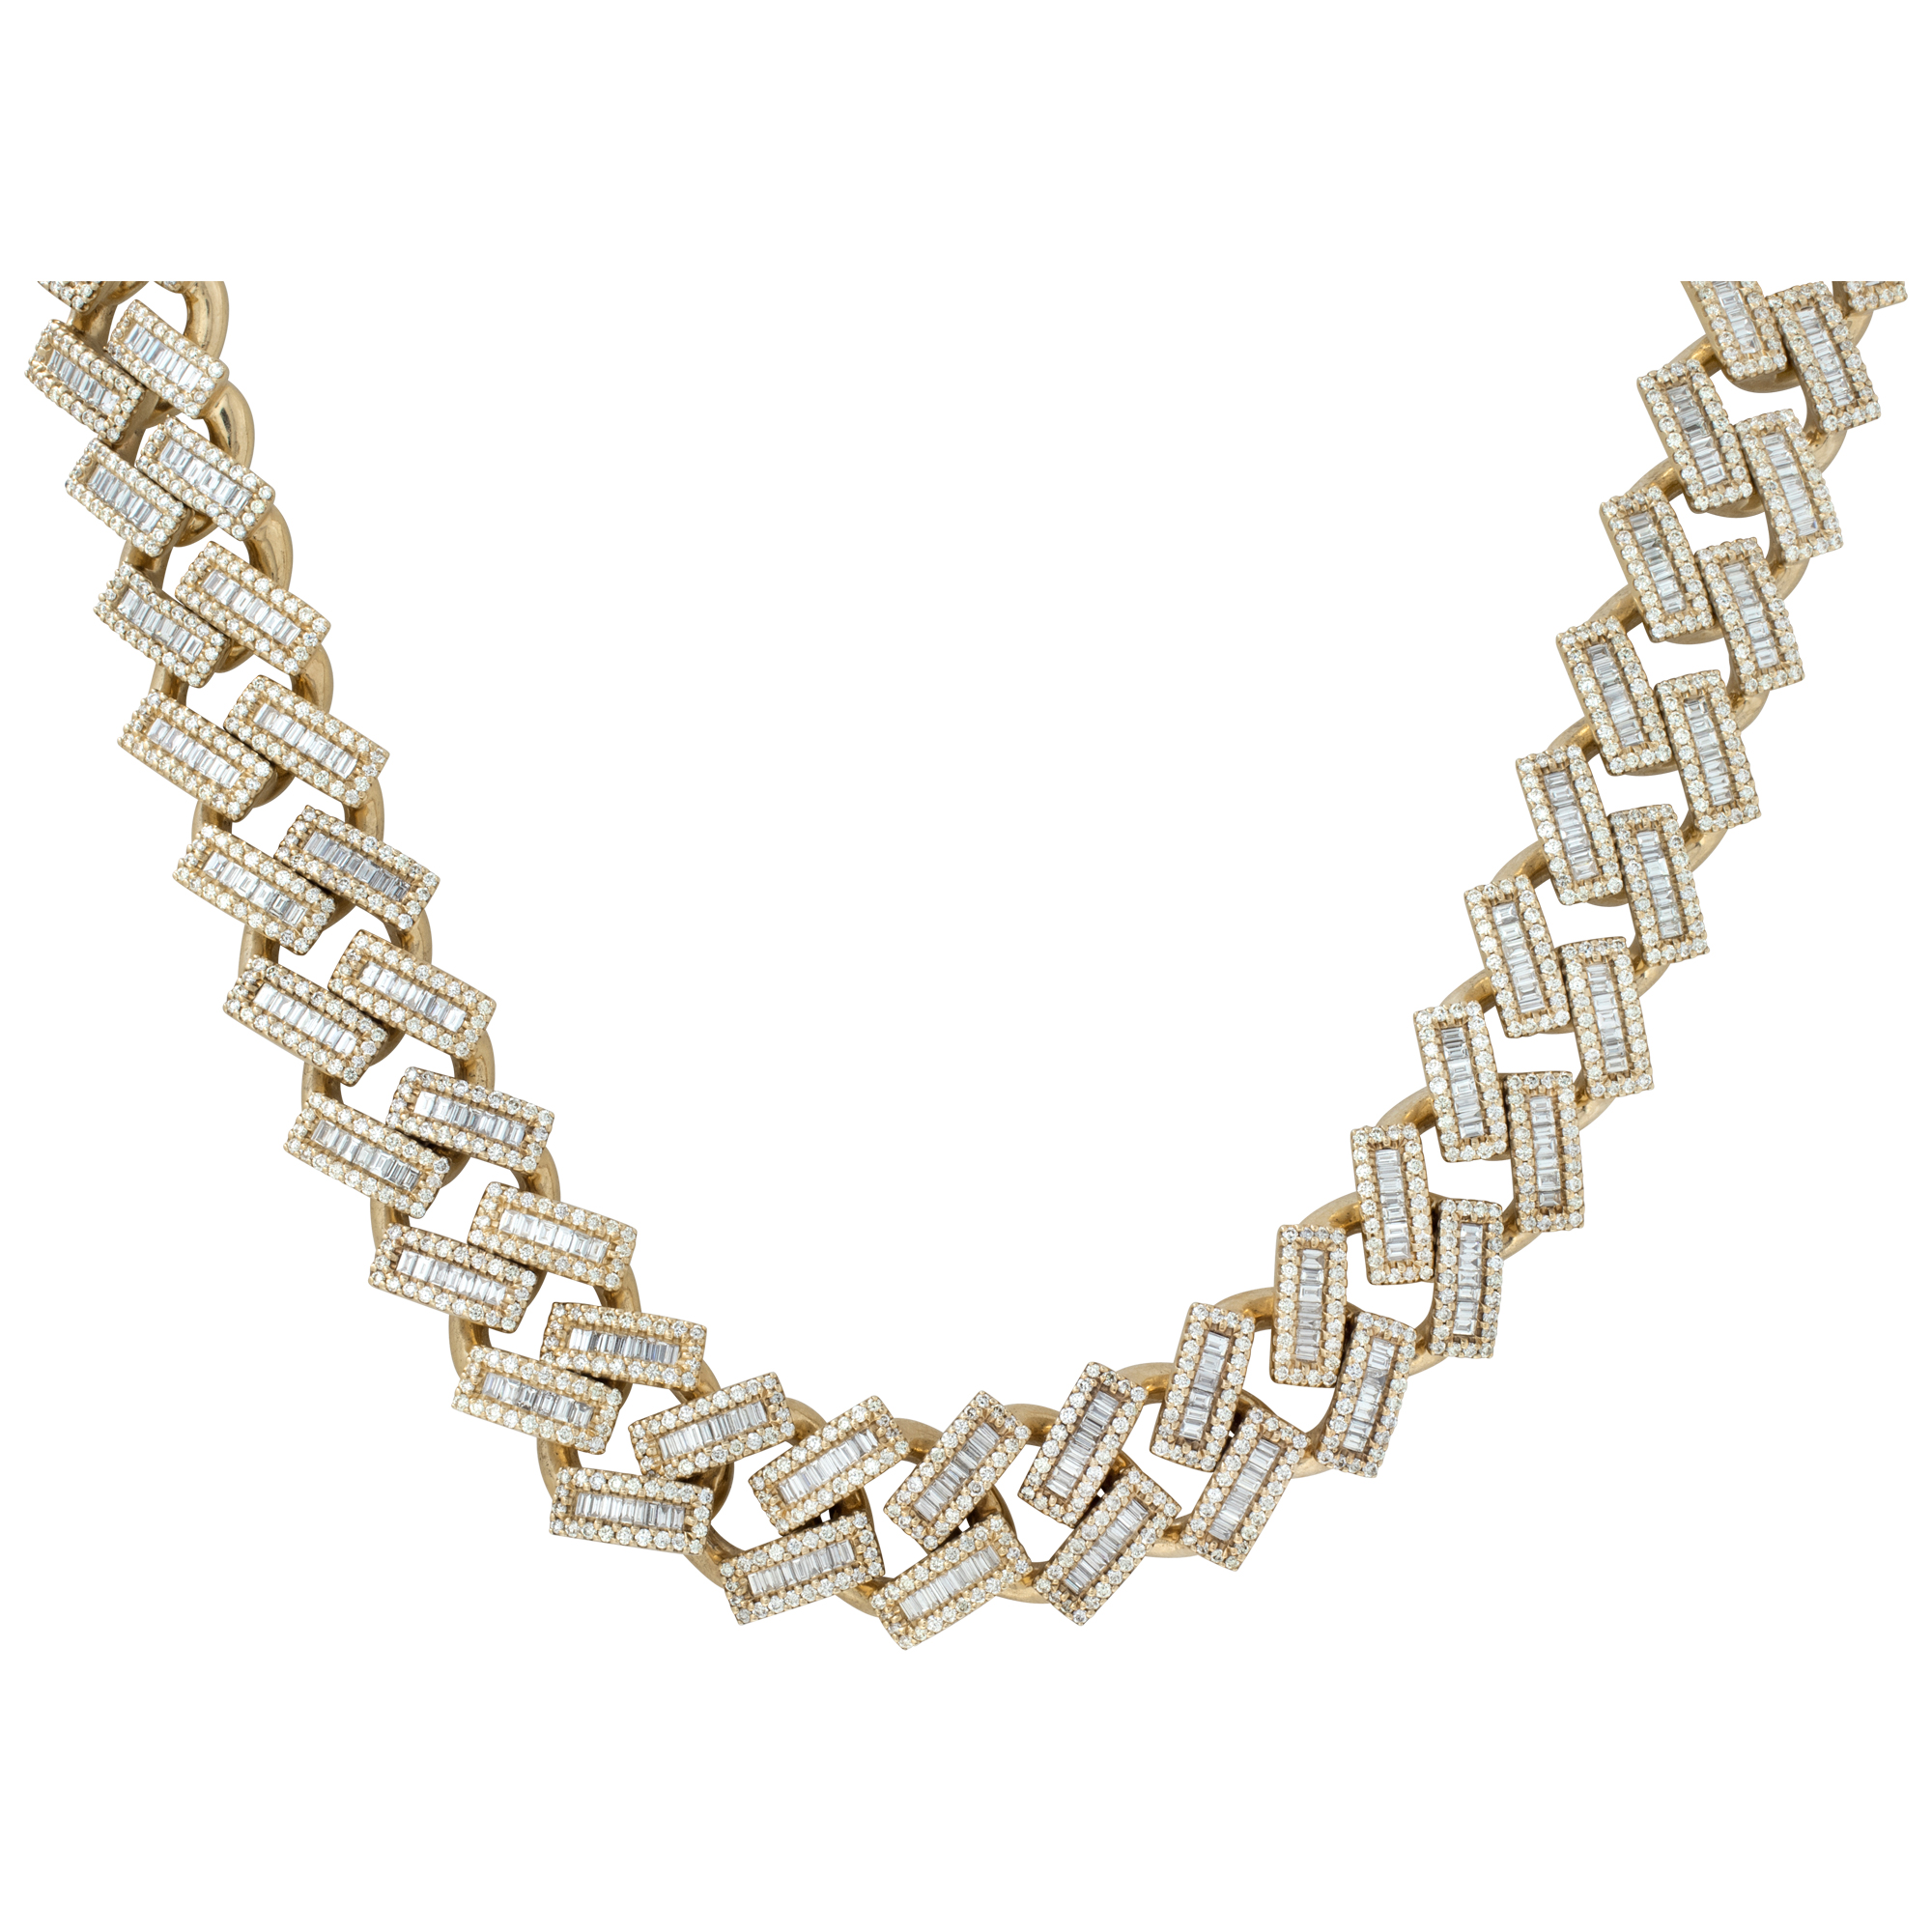 Heavy Miami Cuban Link diamond chain necklace in 10k gold with approx 15.50 carats